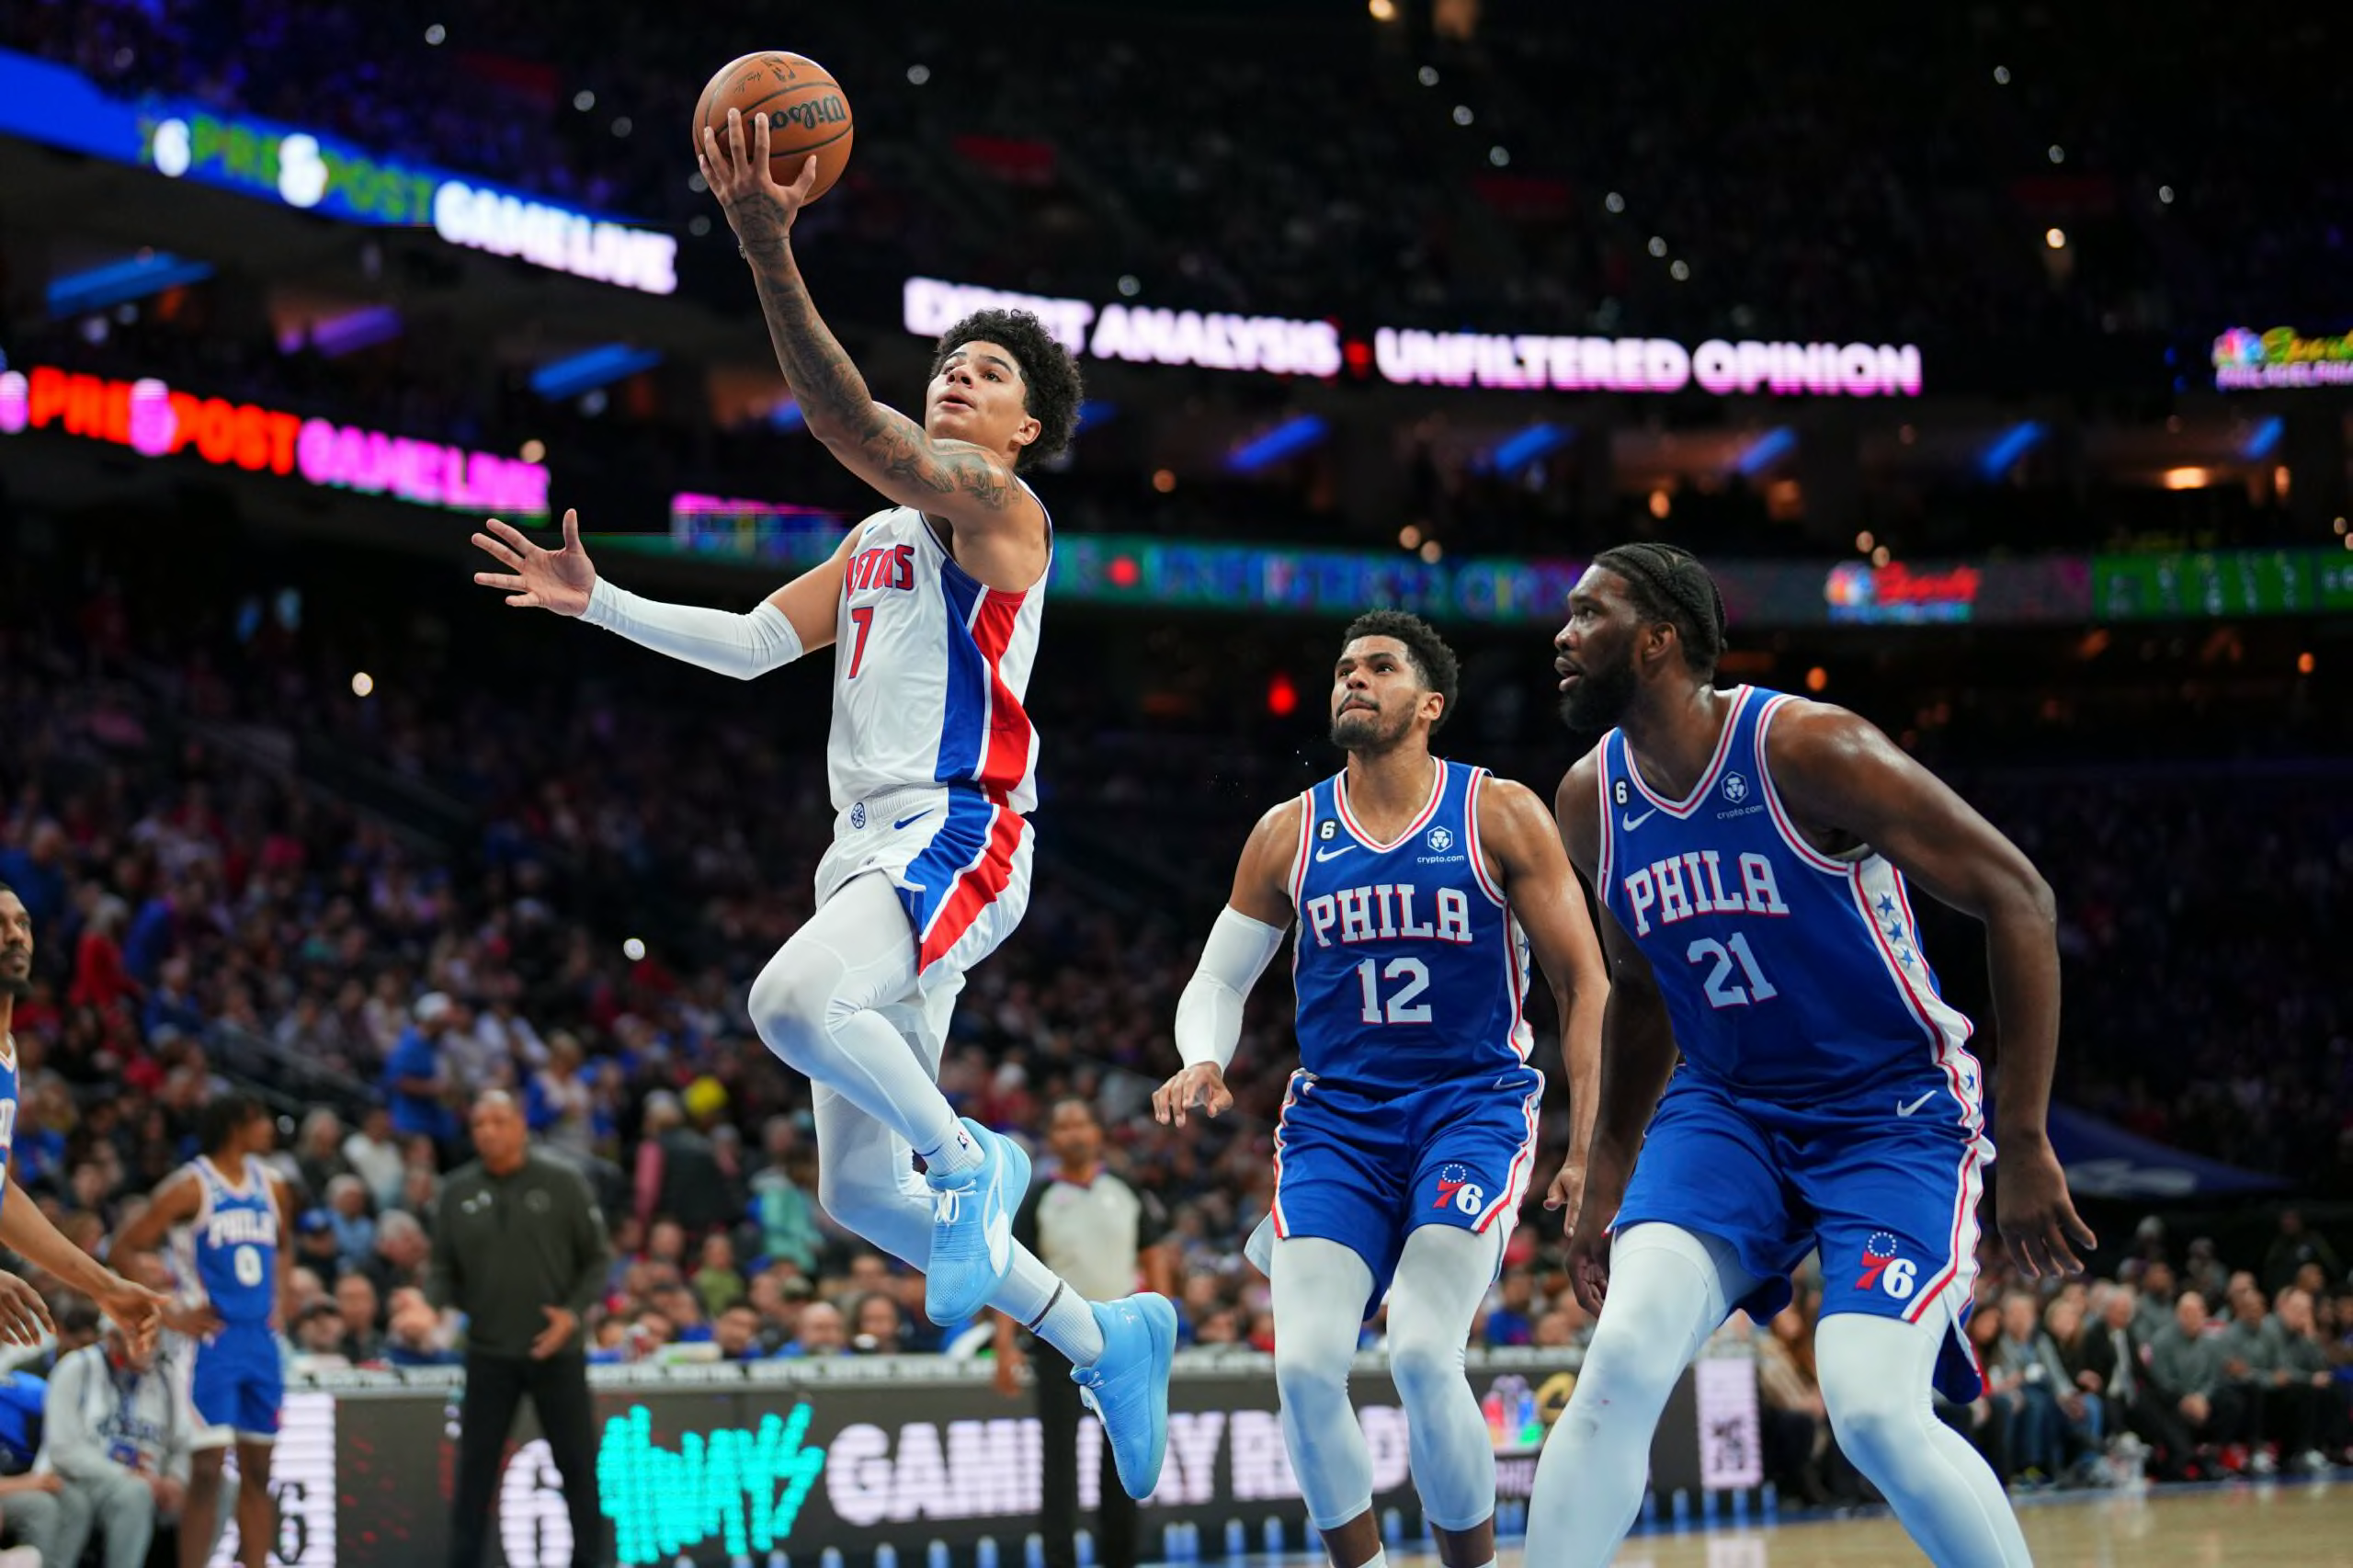 Pistons Vs. Sixers: Detroit Beats Philadelphia In What Could Be